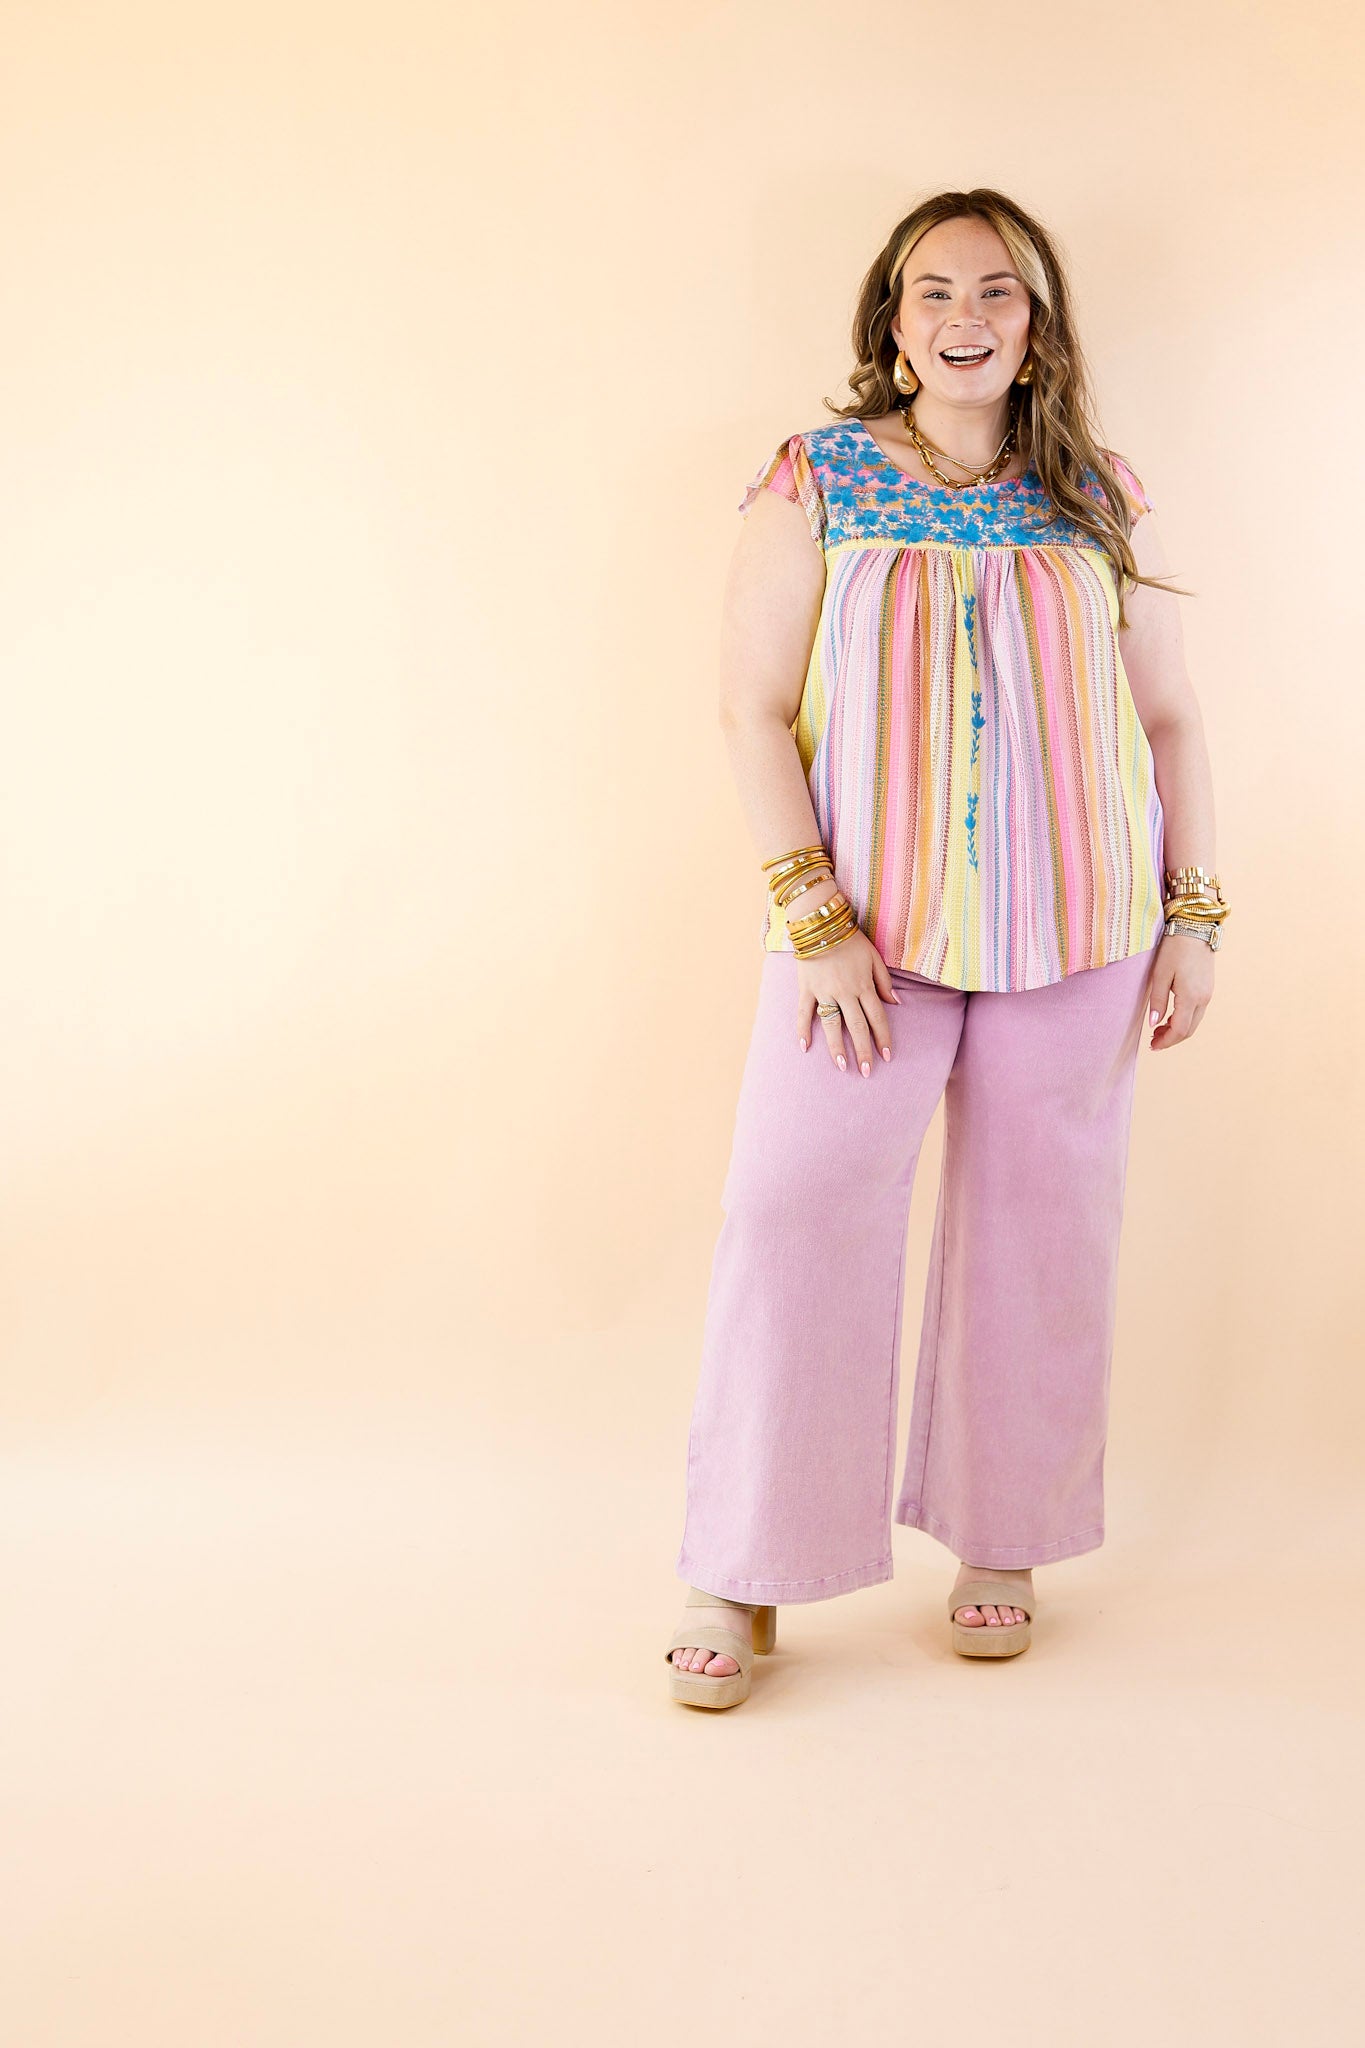 Grab My Hand Serape Ruffle Cap Sleeve Top with Floral Embroidery in Pink Mix - Giddy Up Glamour Boutique